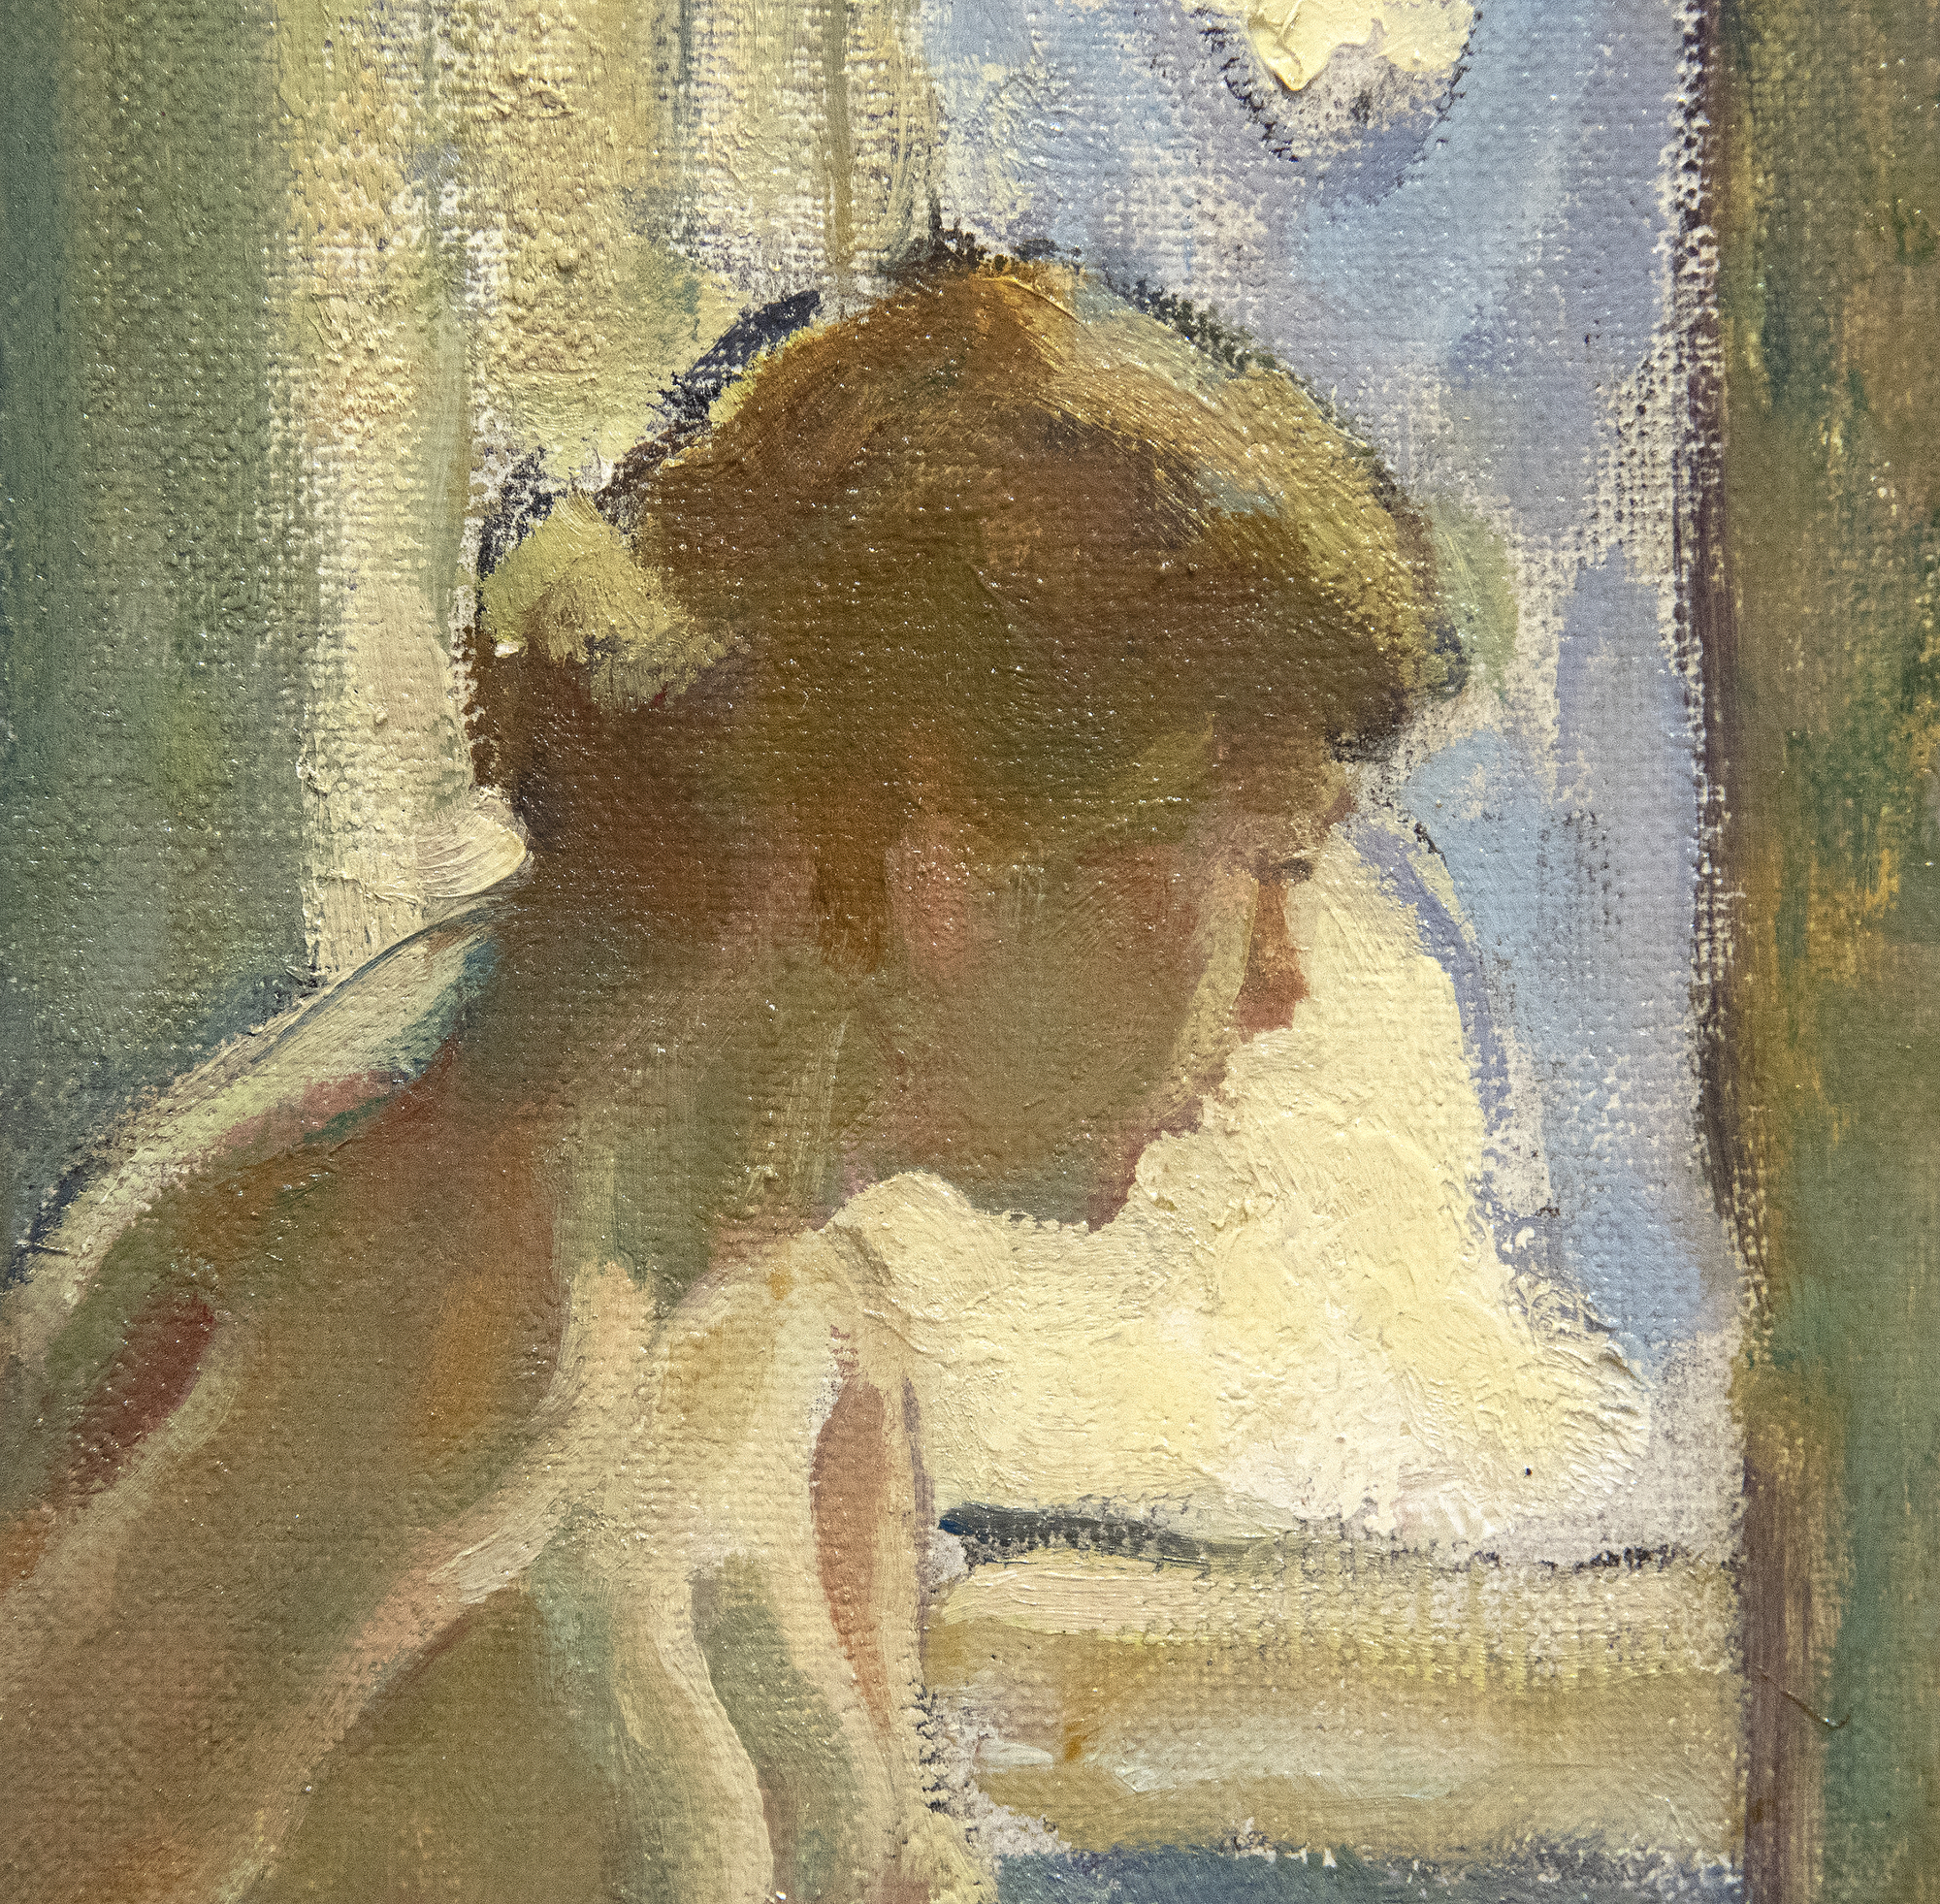 "Interior" is one of Maurice Askenazy’s more modern compositions, calling to mind the work of Bonnard or Vuillard. The intimate scene shows a nude female model, dramatically seen in profile, posing for a painter in a sun-drenched studio. The door to the room is open, giving the impression that the viewer is stealing a glimpse of a private interaction between artist and model. A cleverly placed mirror on the back of the open door reveals the reflection of the painter, who we are meant to take as Askenazy himself, at work. Askenazy takes great care to depict the details of the room, from the patterned ottoman to the framed paintings on the walls, each a mosaic of Impressionistic color.